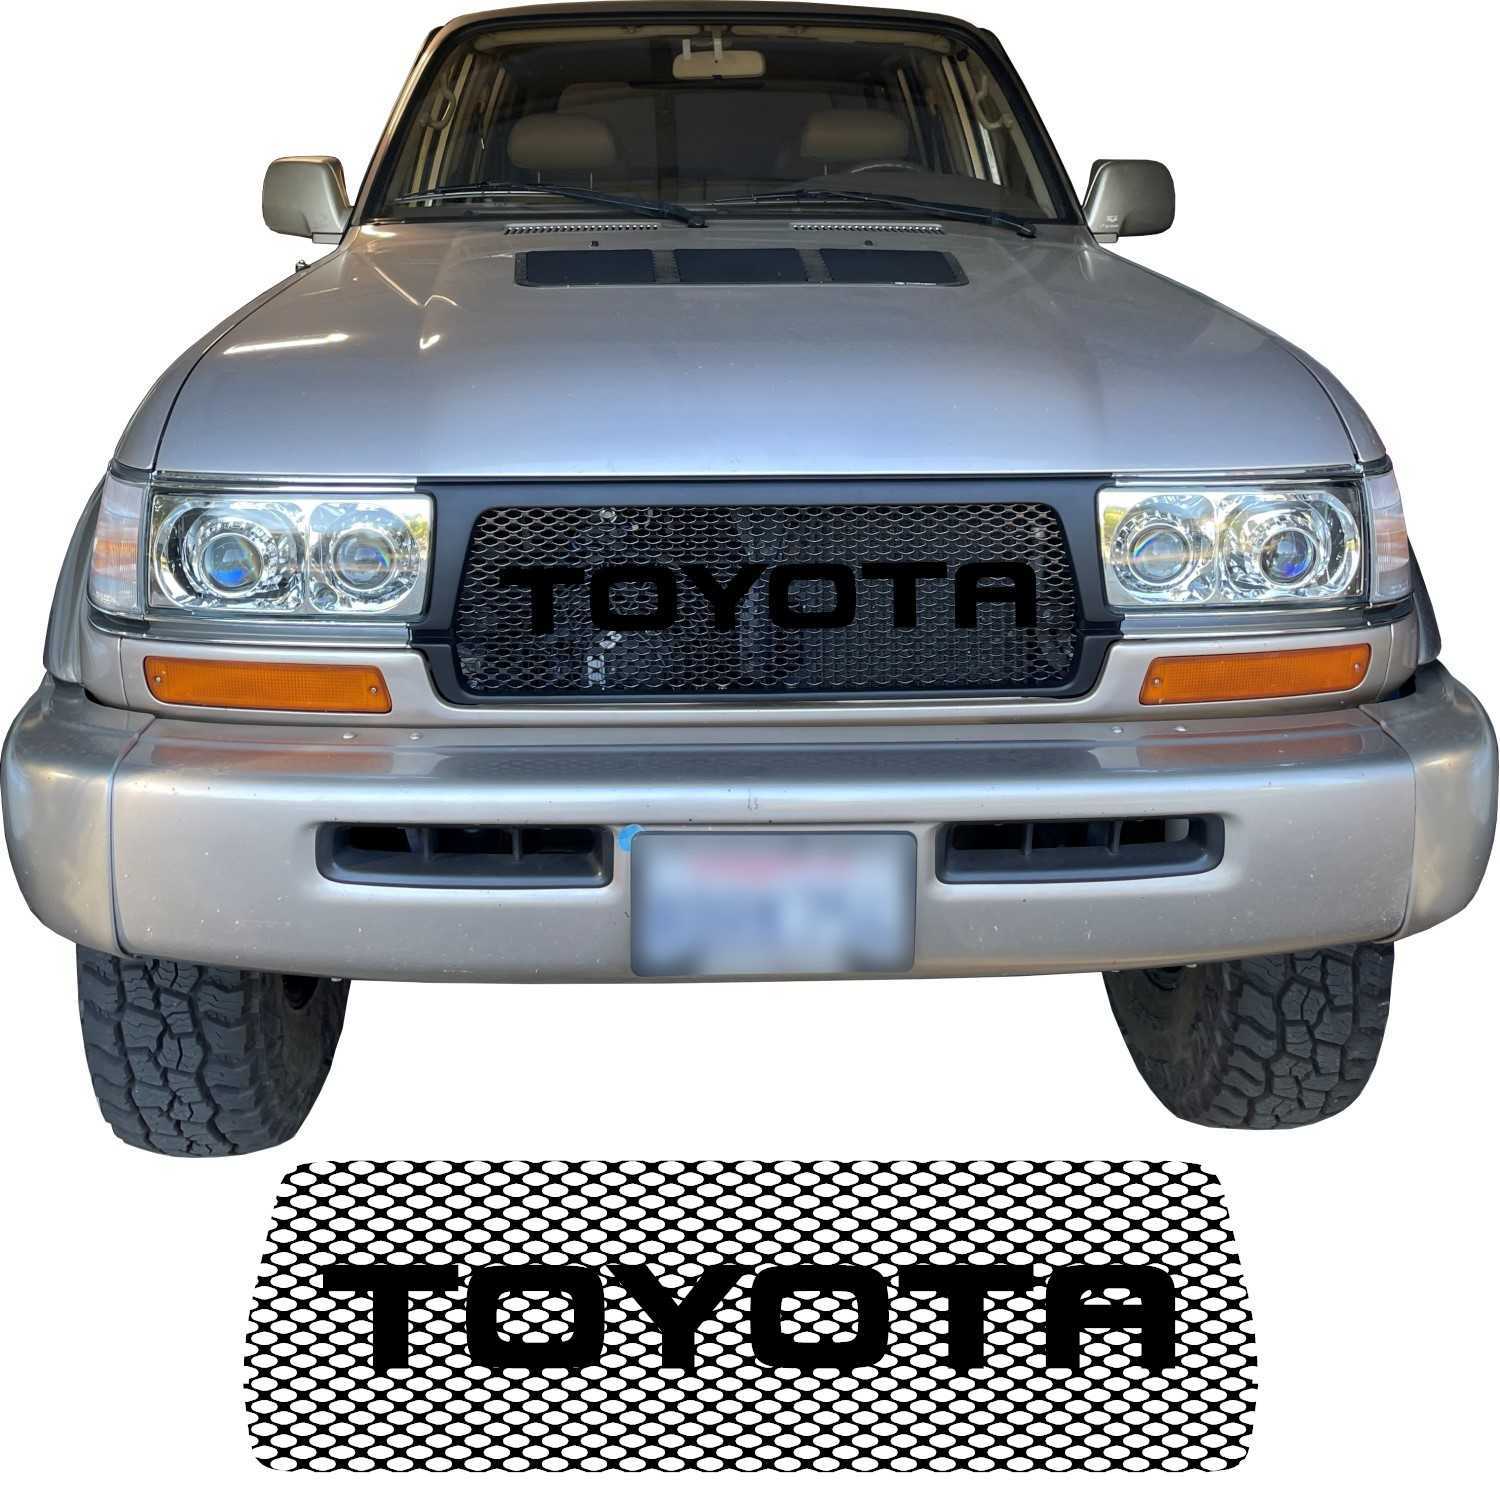 1995 - 1997 Toyota Land Cruiser Series 80 Grill Mesh and Big Letters